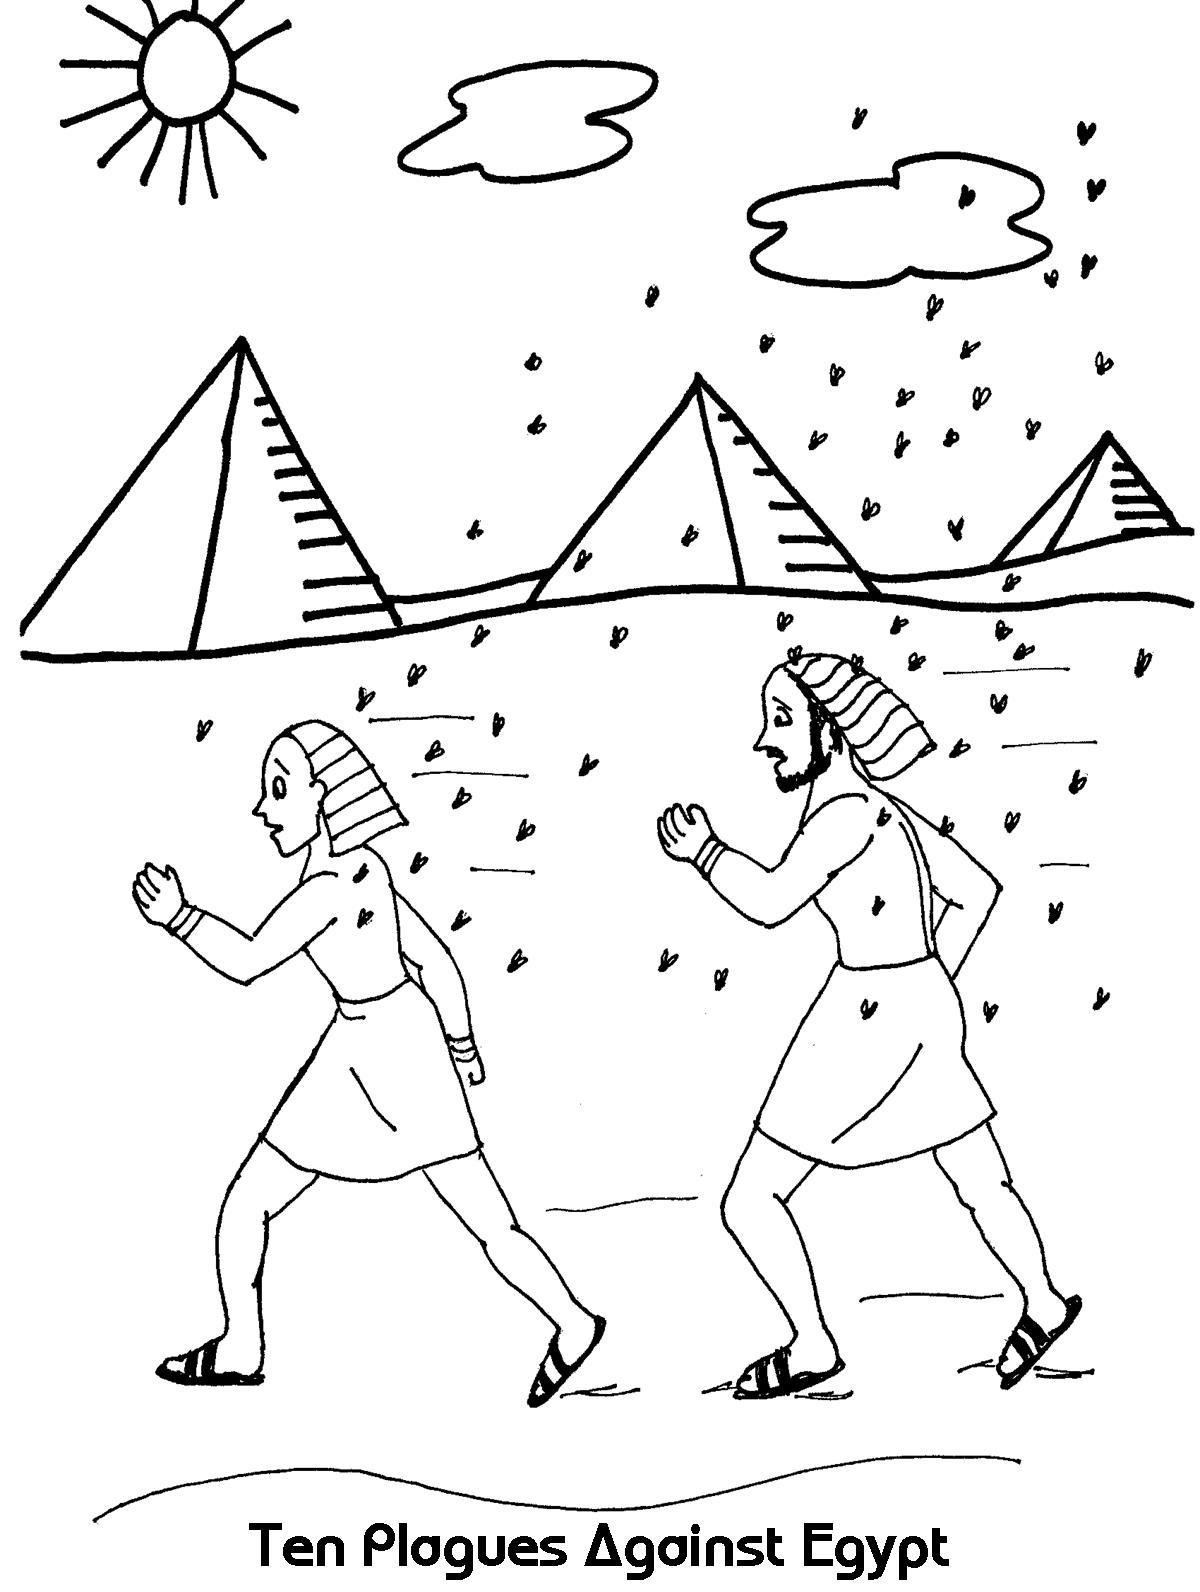 10 Plagues Of Egypt Coloring Pages at GetColorings.com